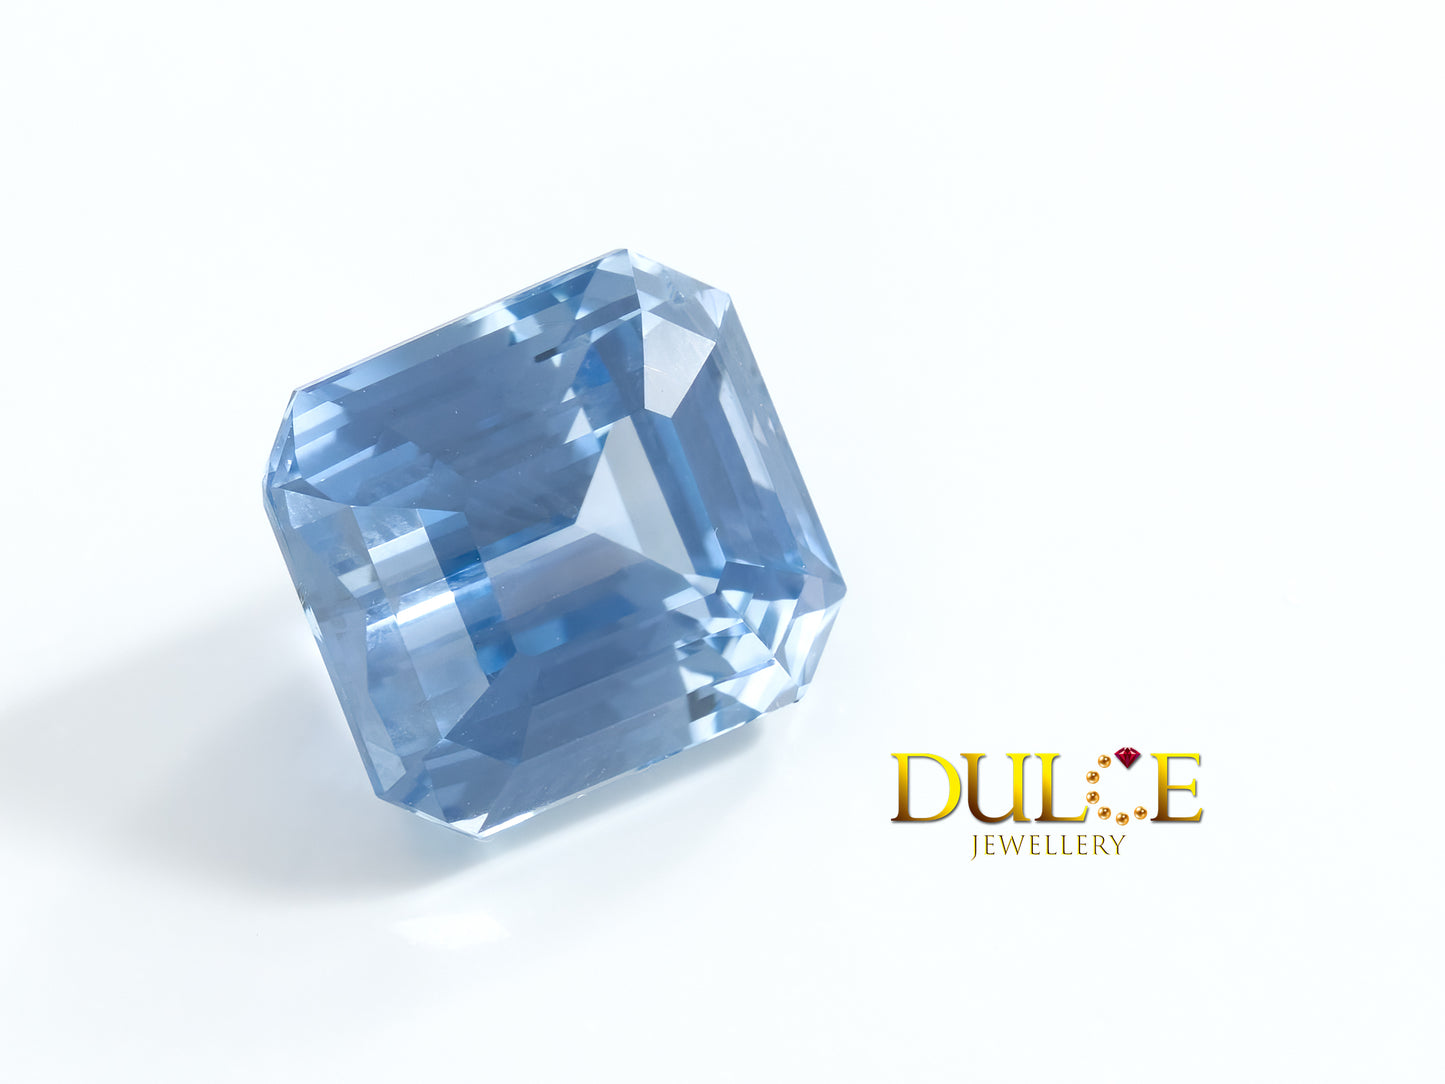 Blue Sapphire (Price by request)